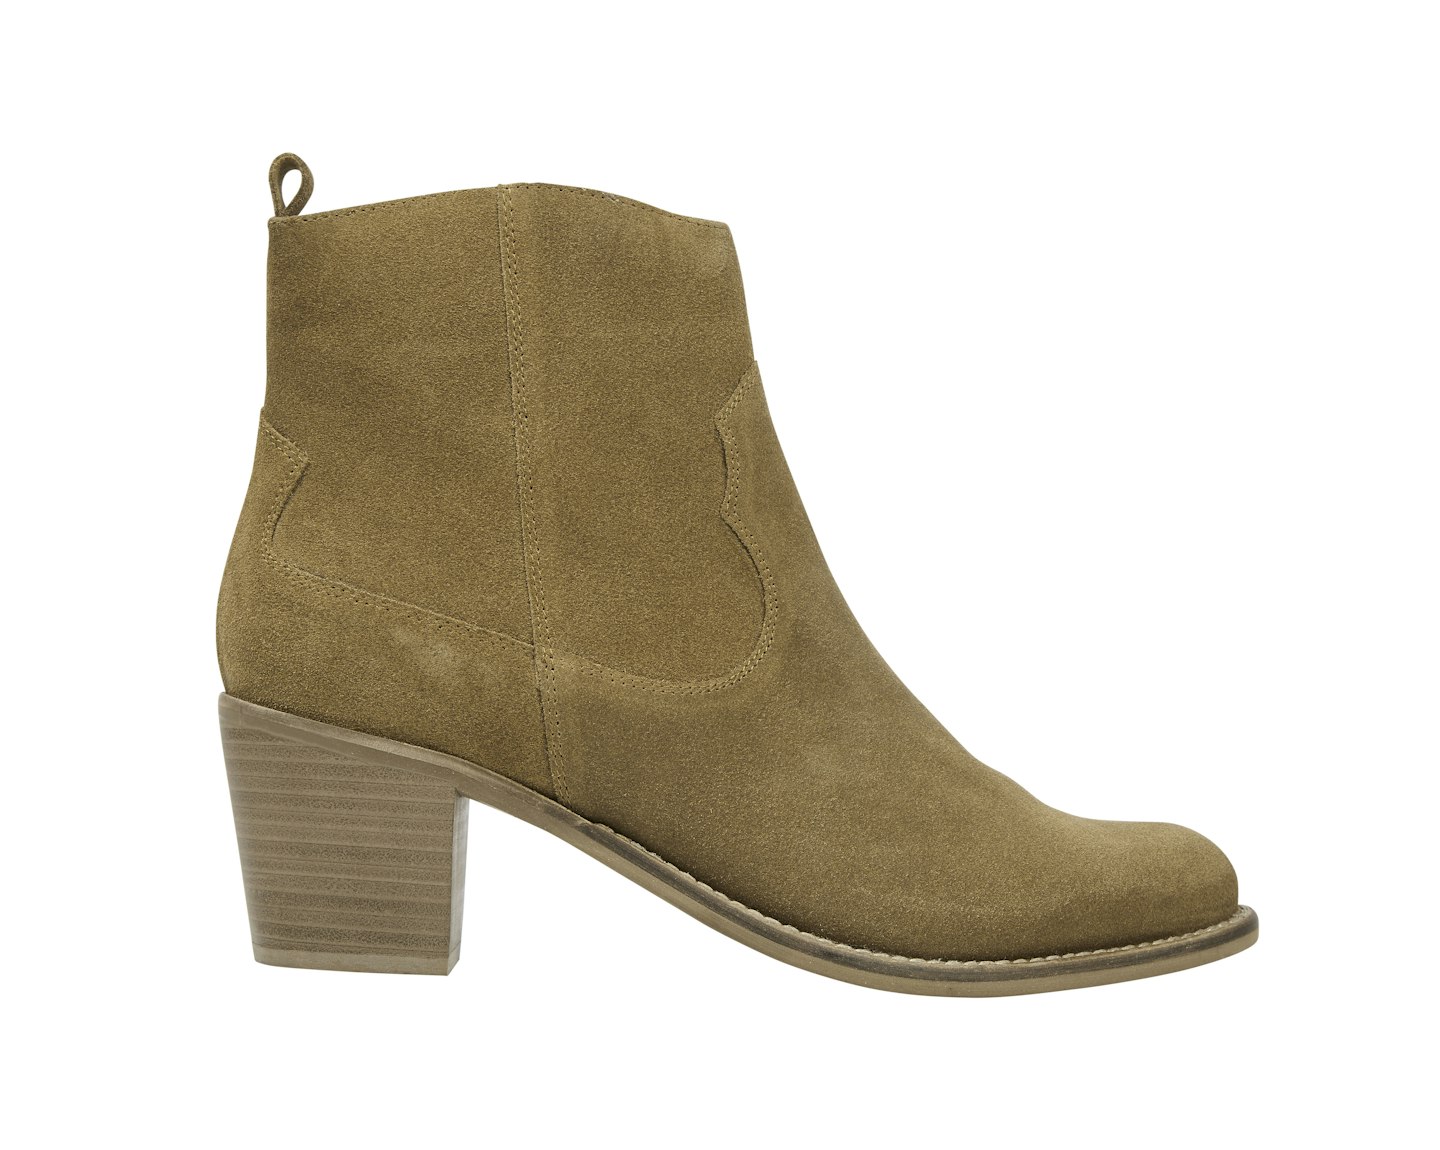 Holly Willoughby M&S Suede Western ankle boots, 49.50